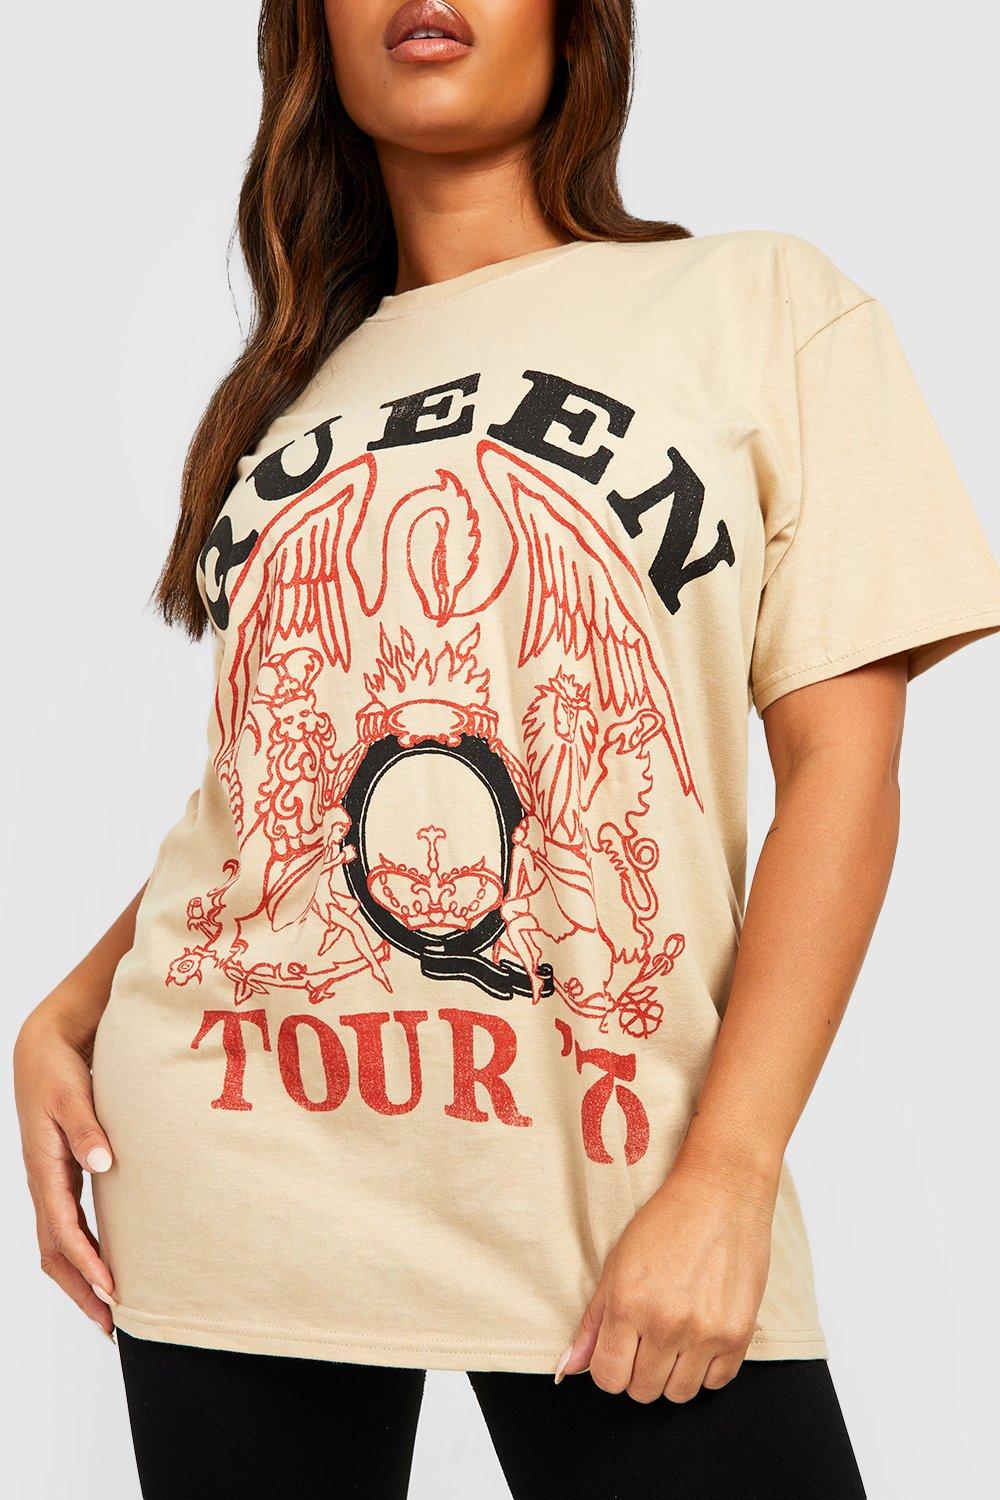 Zwembad actrice Orkaan Plus Queen Tour Band Shirt | boohoo